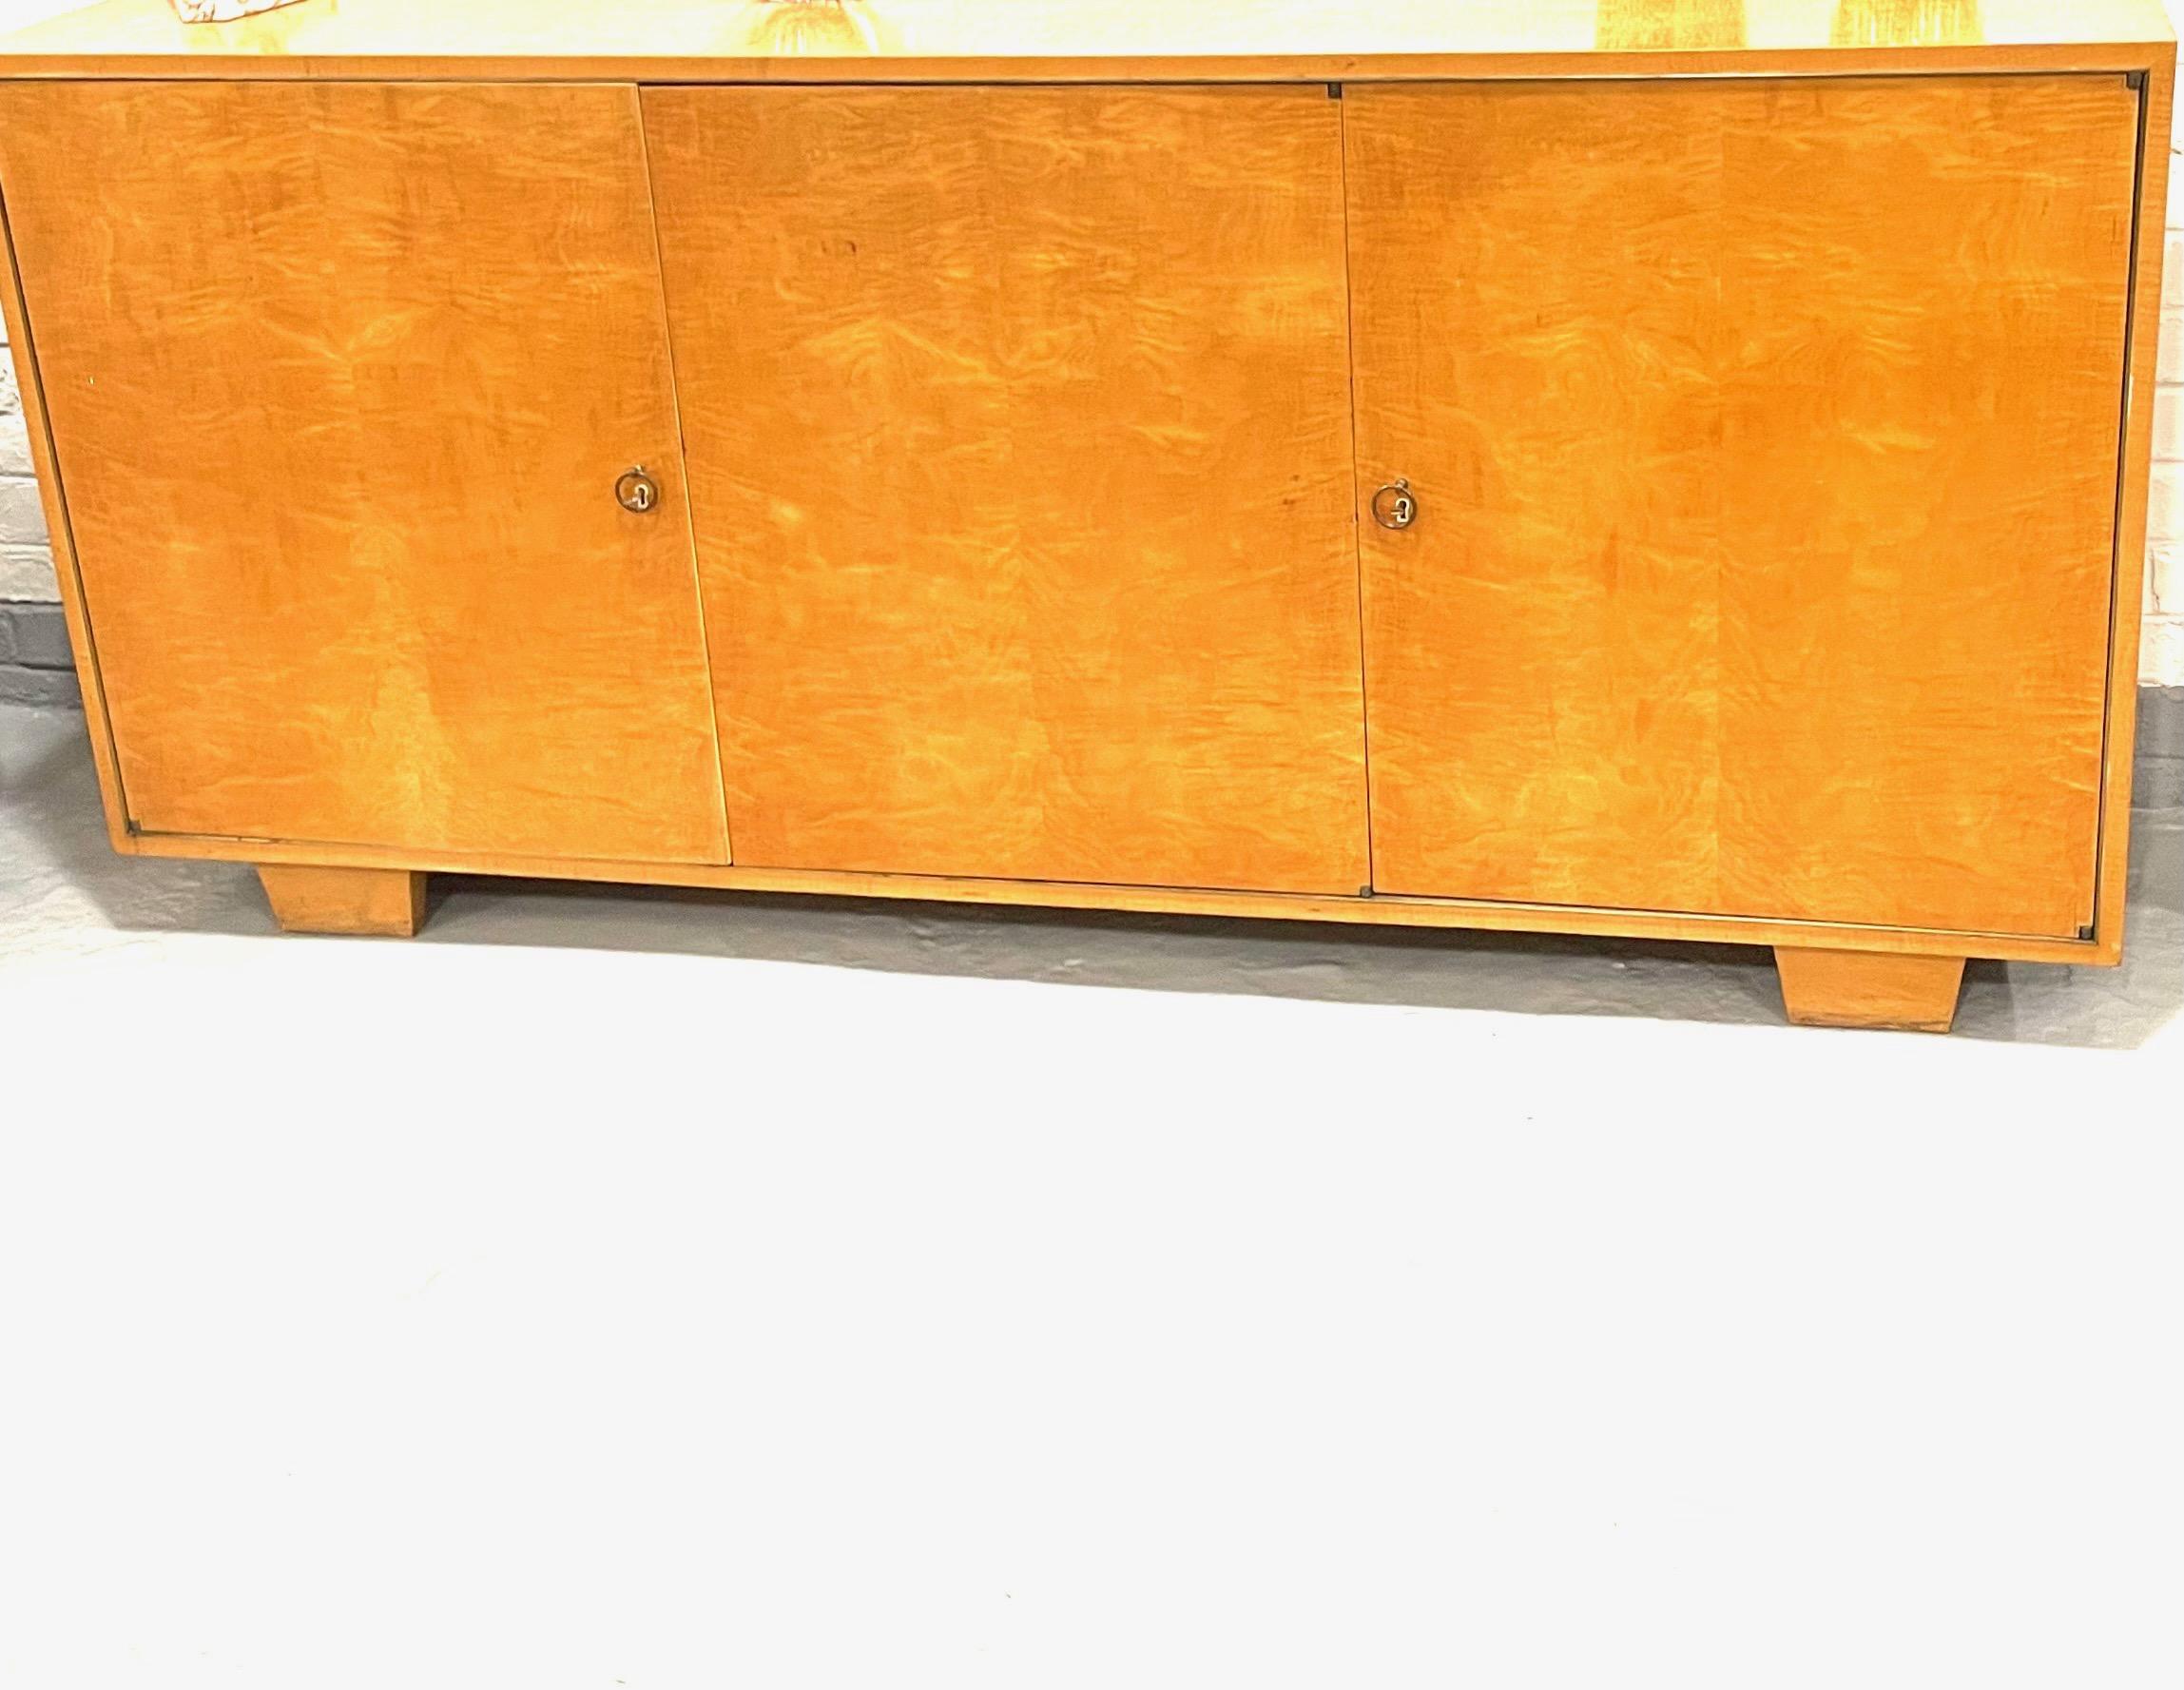 Elegant art deco sycomore three doors sideboard with multiple different size drawers in the style of Jean-Michel Frank.
Monolitic shape, brass rings handles ,bone keyholes, two keys.
Attributed to De  Coene-Frères Belgium.
Circa 1935.